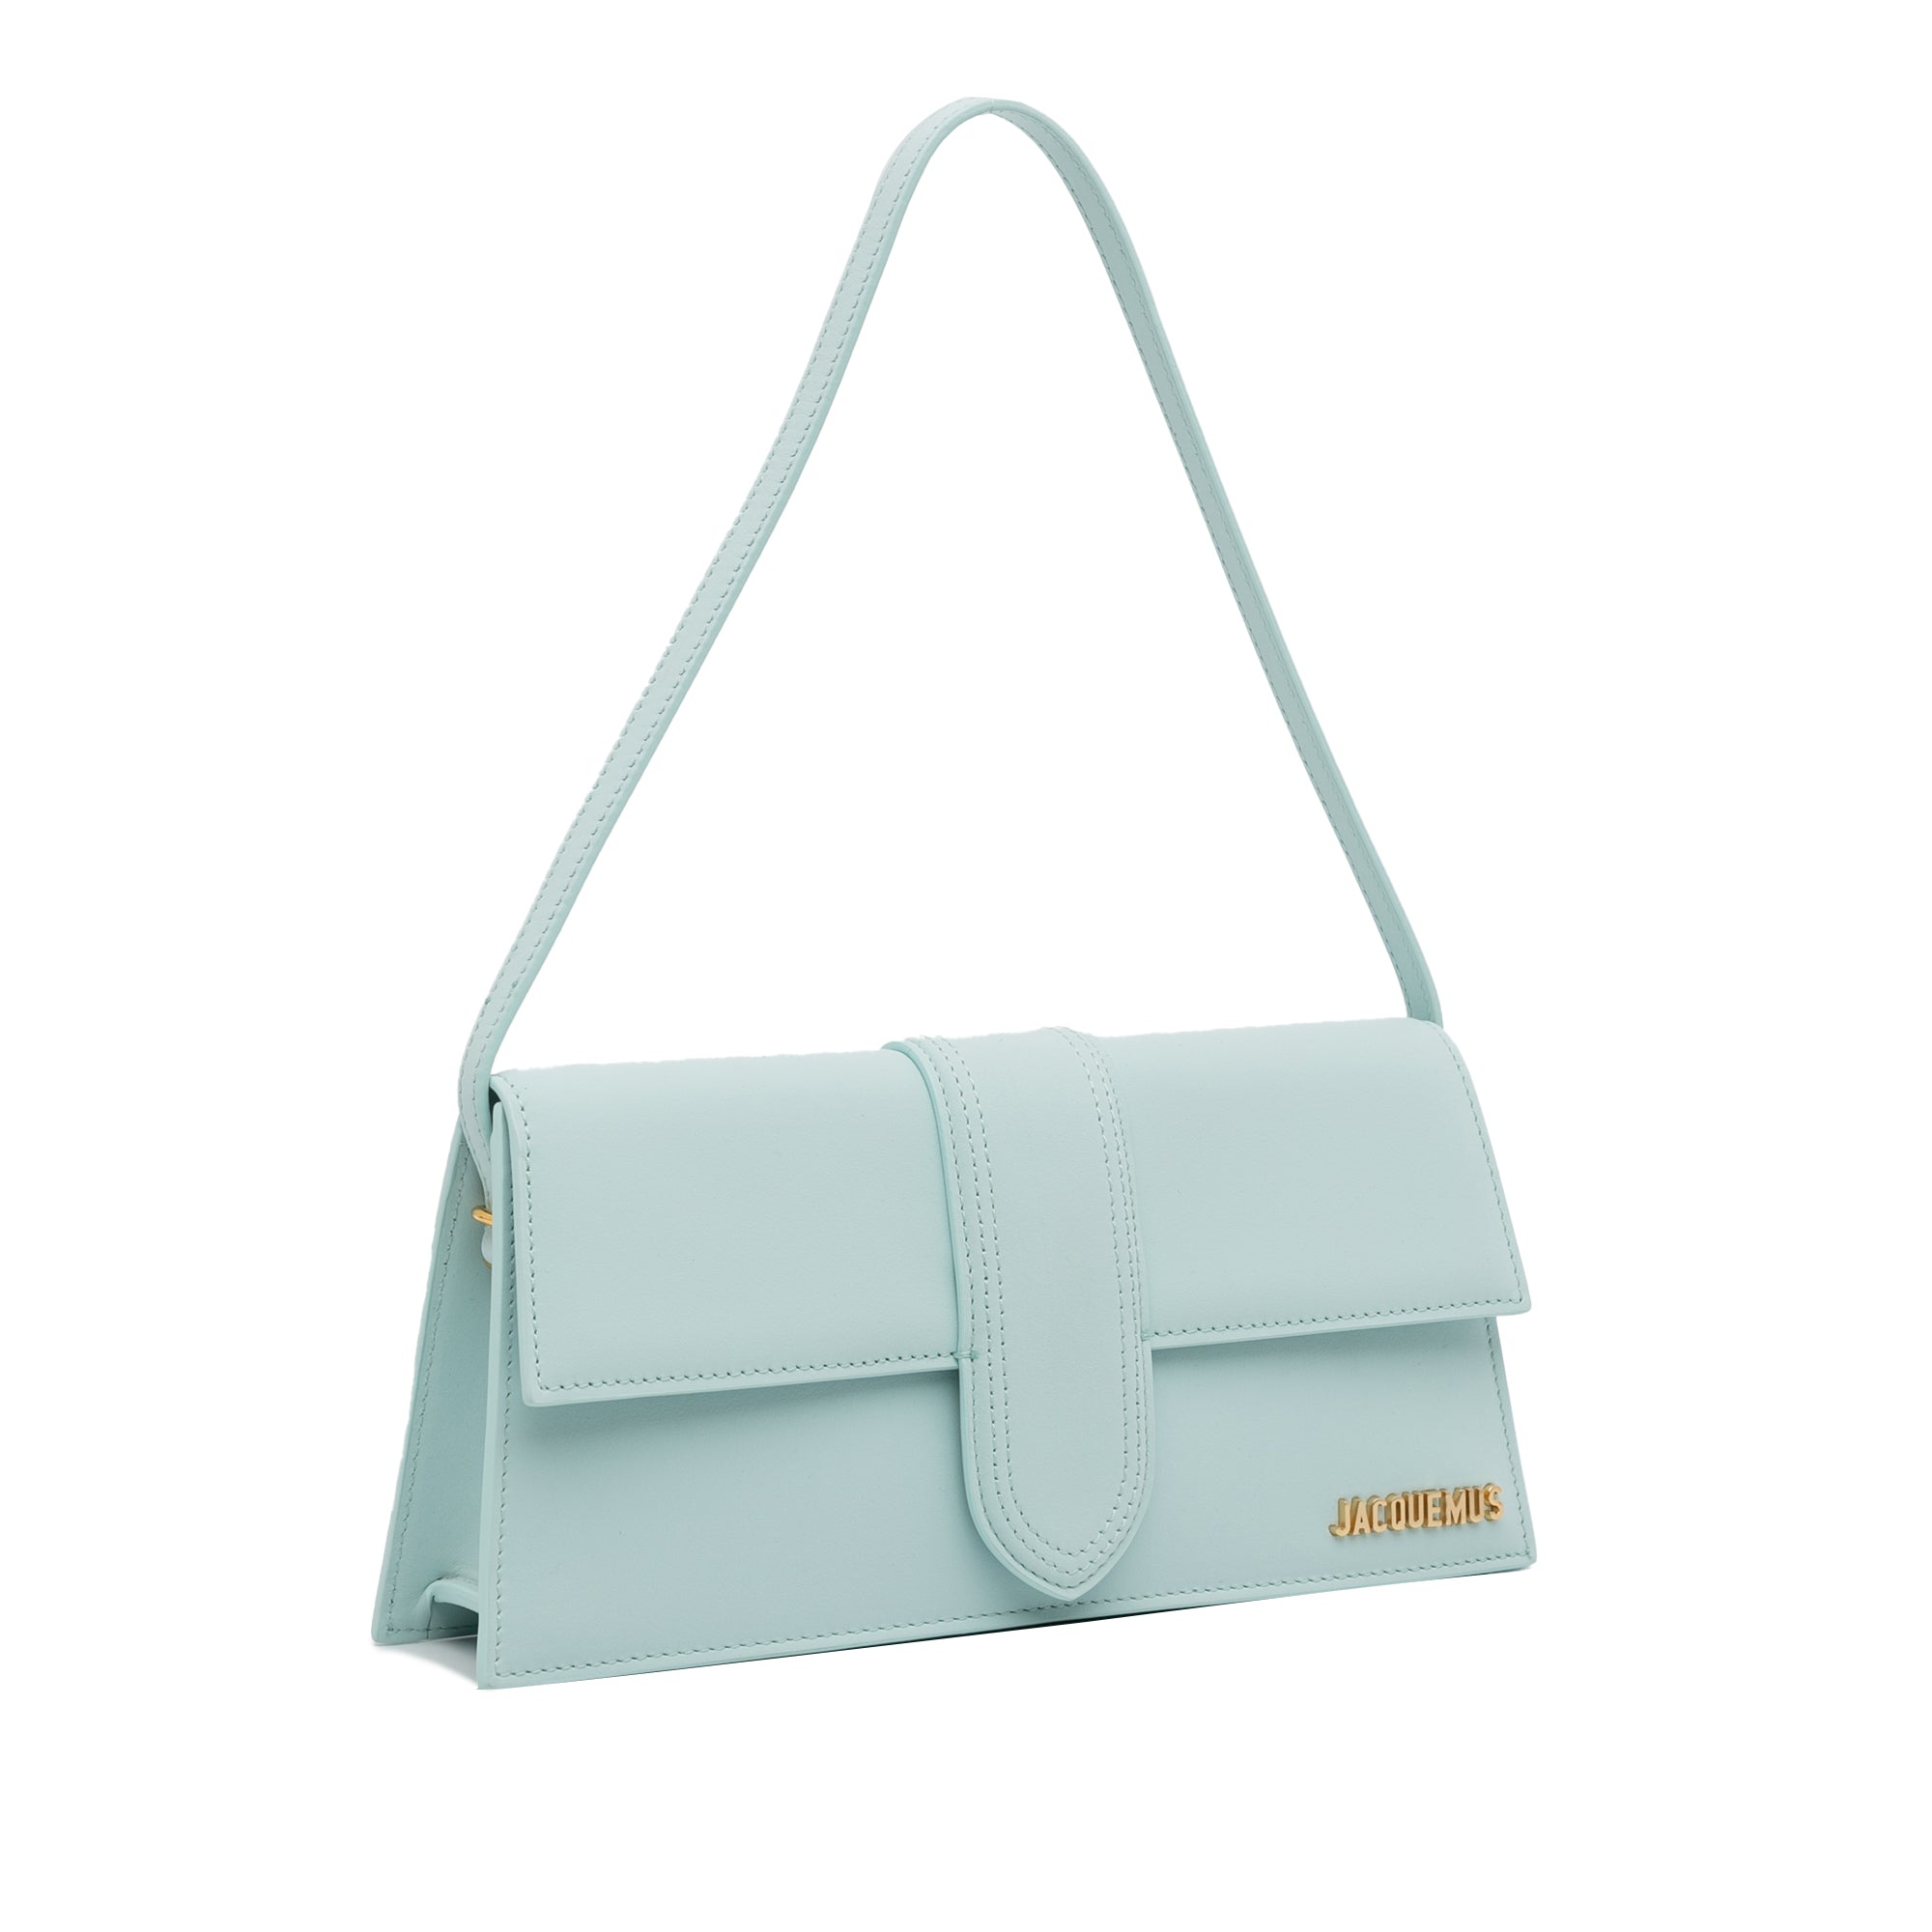 Jacquemus Le Bambino Long Shoulder Bag White in Leather with Gold